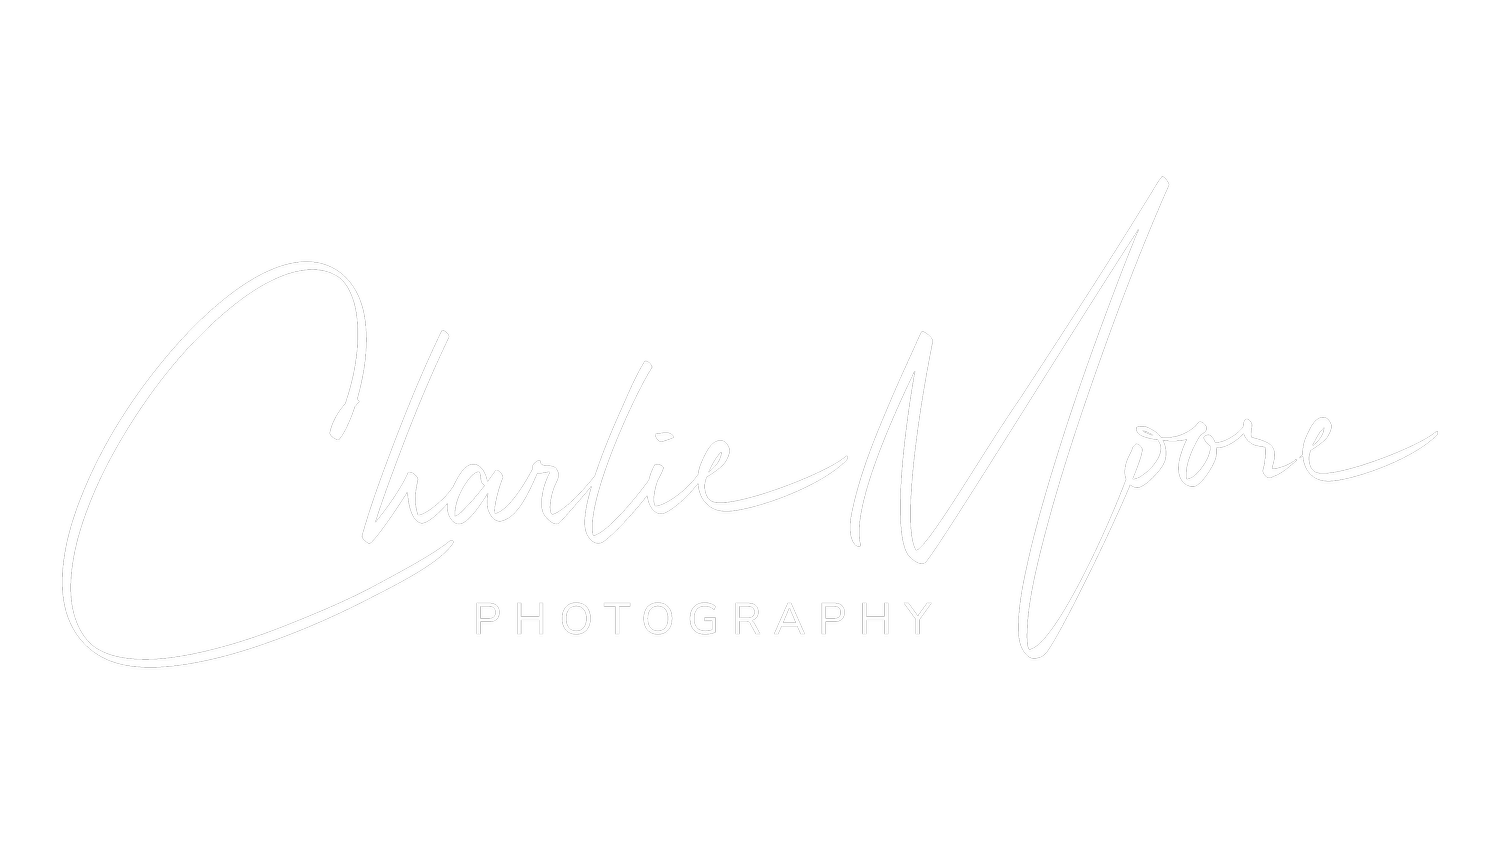 Charlie Moore Photography